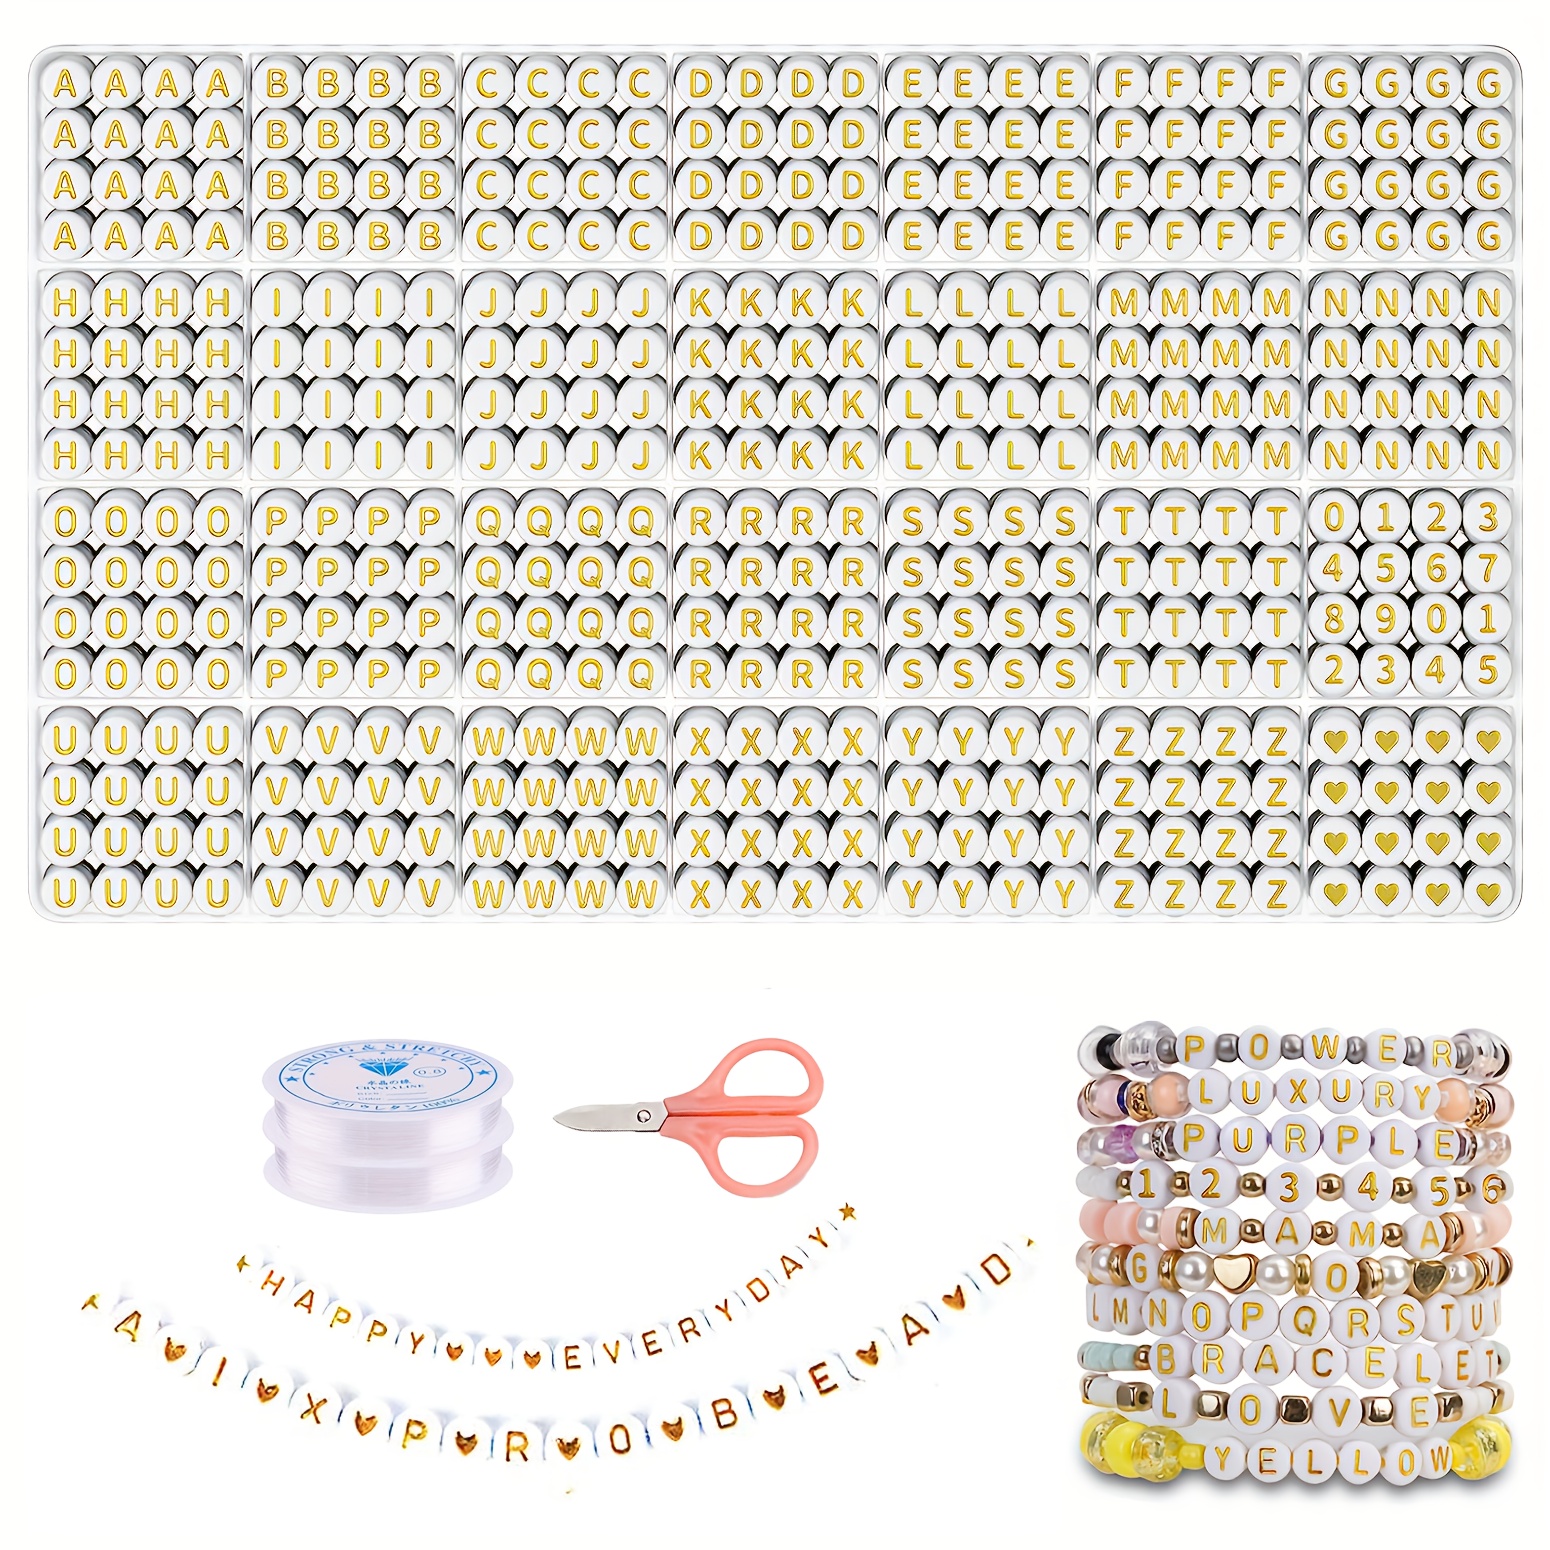 1Box/10grids Alloy Color CCB Round Loose Beads Alphabet Beads, Alphabet  Letter Beads, With Random Color Elastic String, Jewelry Making Set For  Jewelry